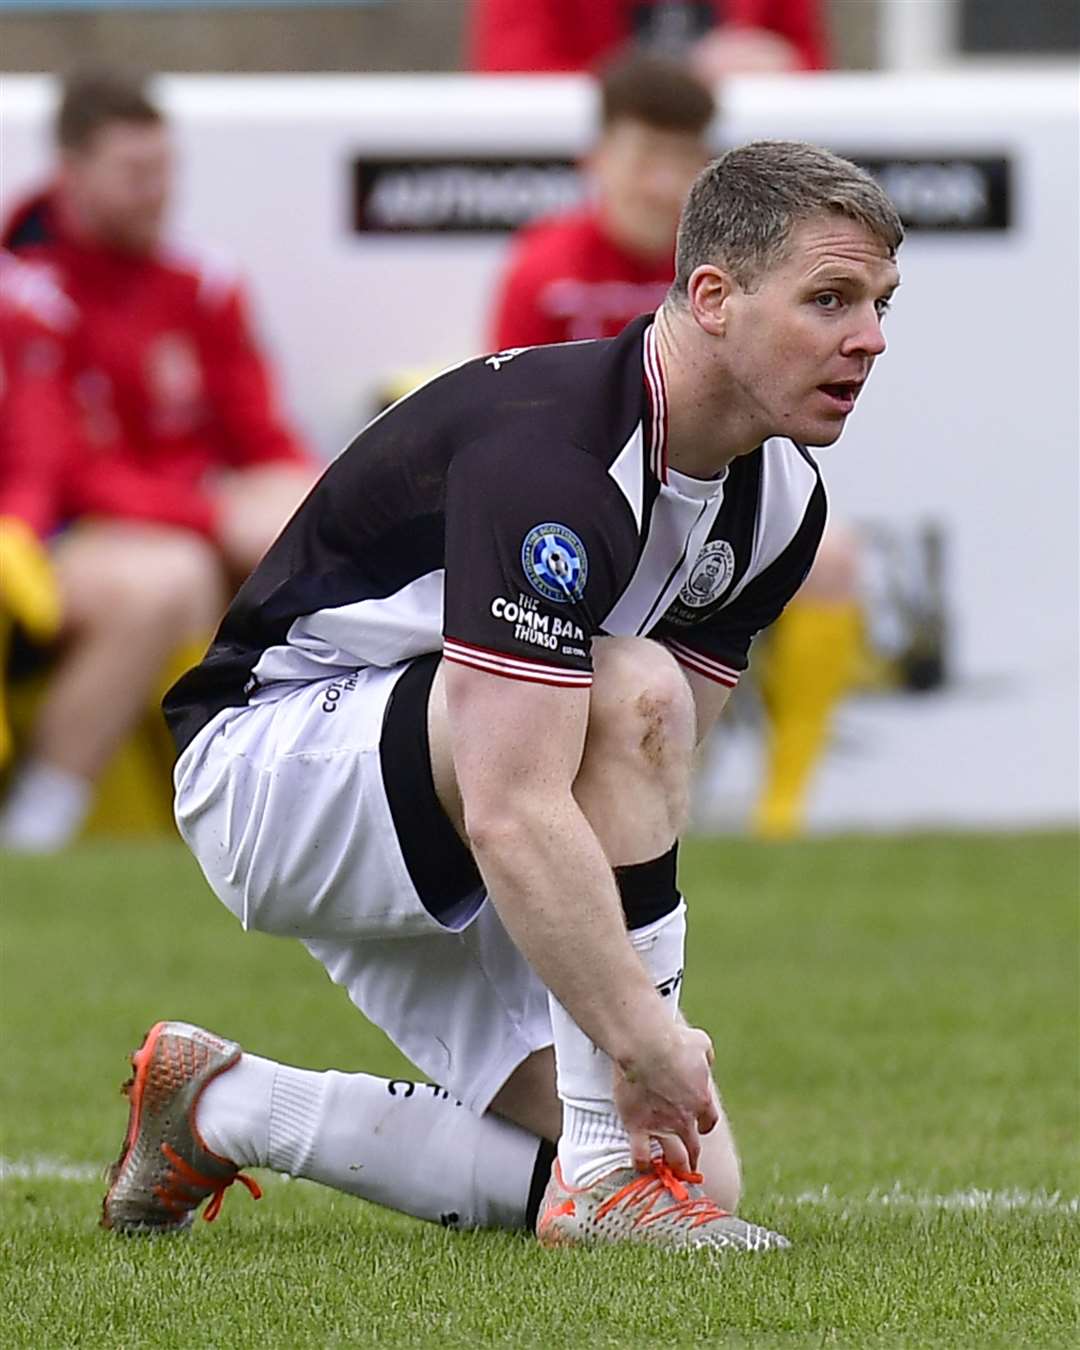 Davie Allan tying a bootlace during the match at Inverurie last April in which he was later injured. Picture: Mel Roger